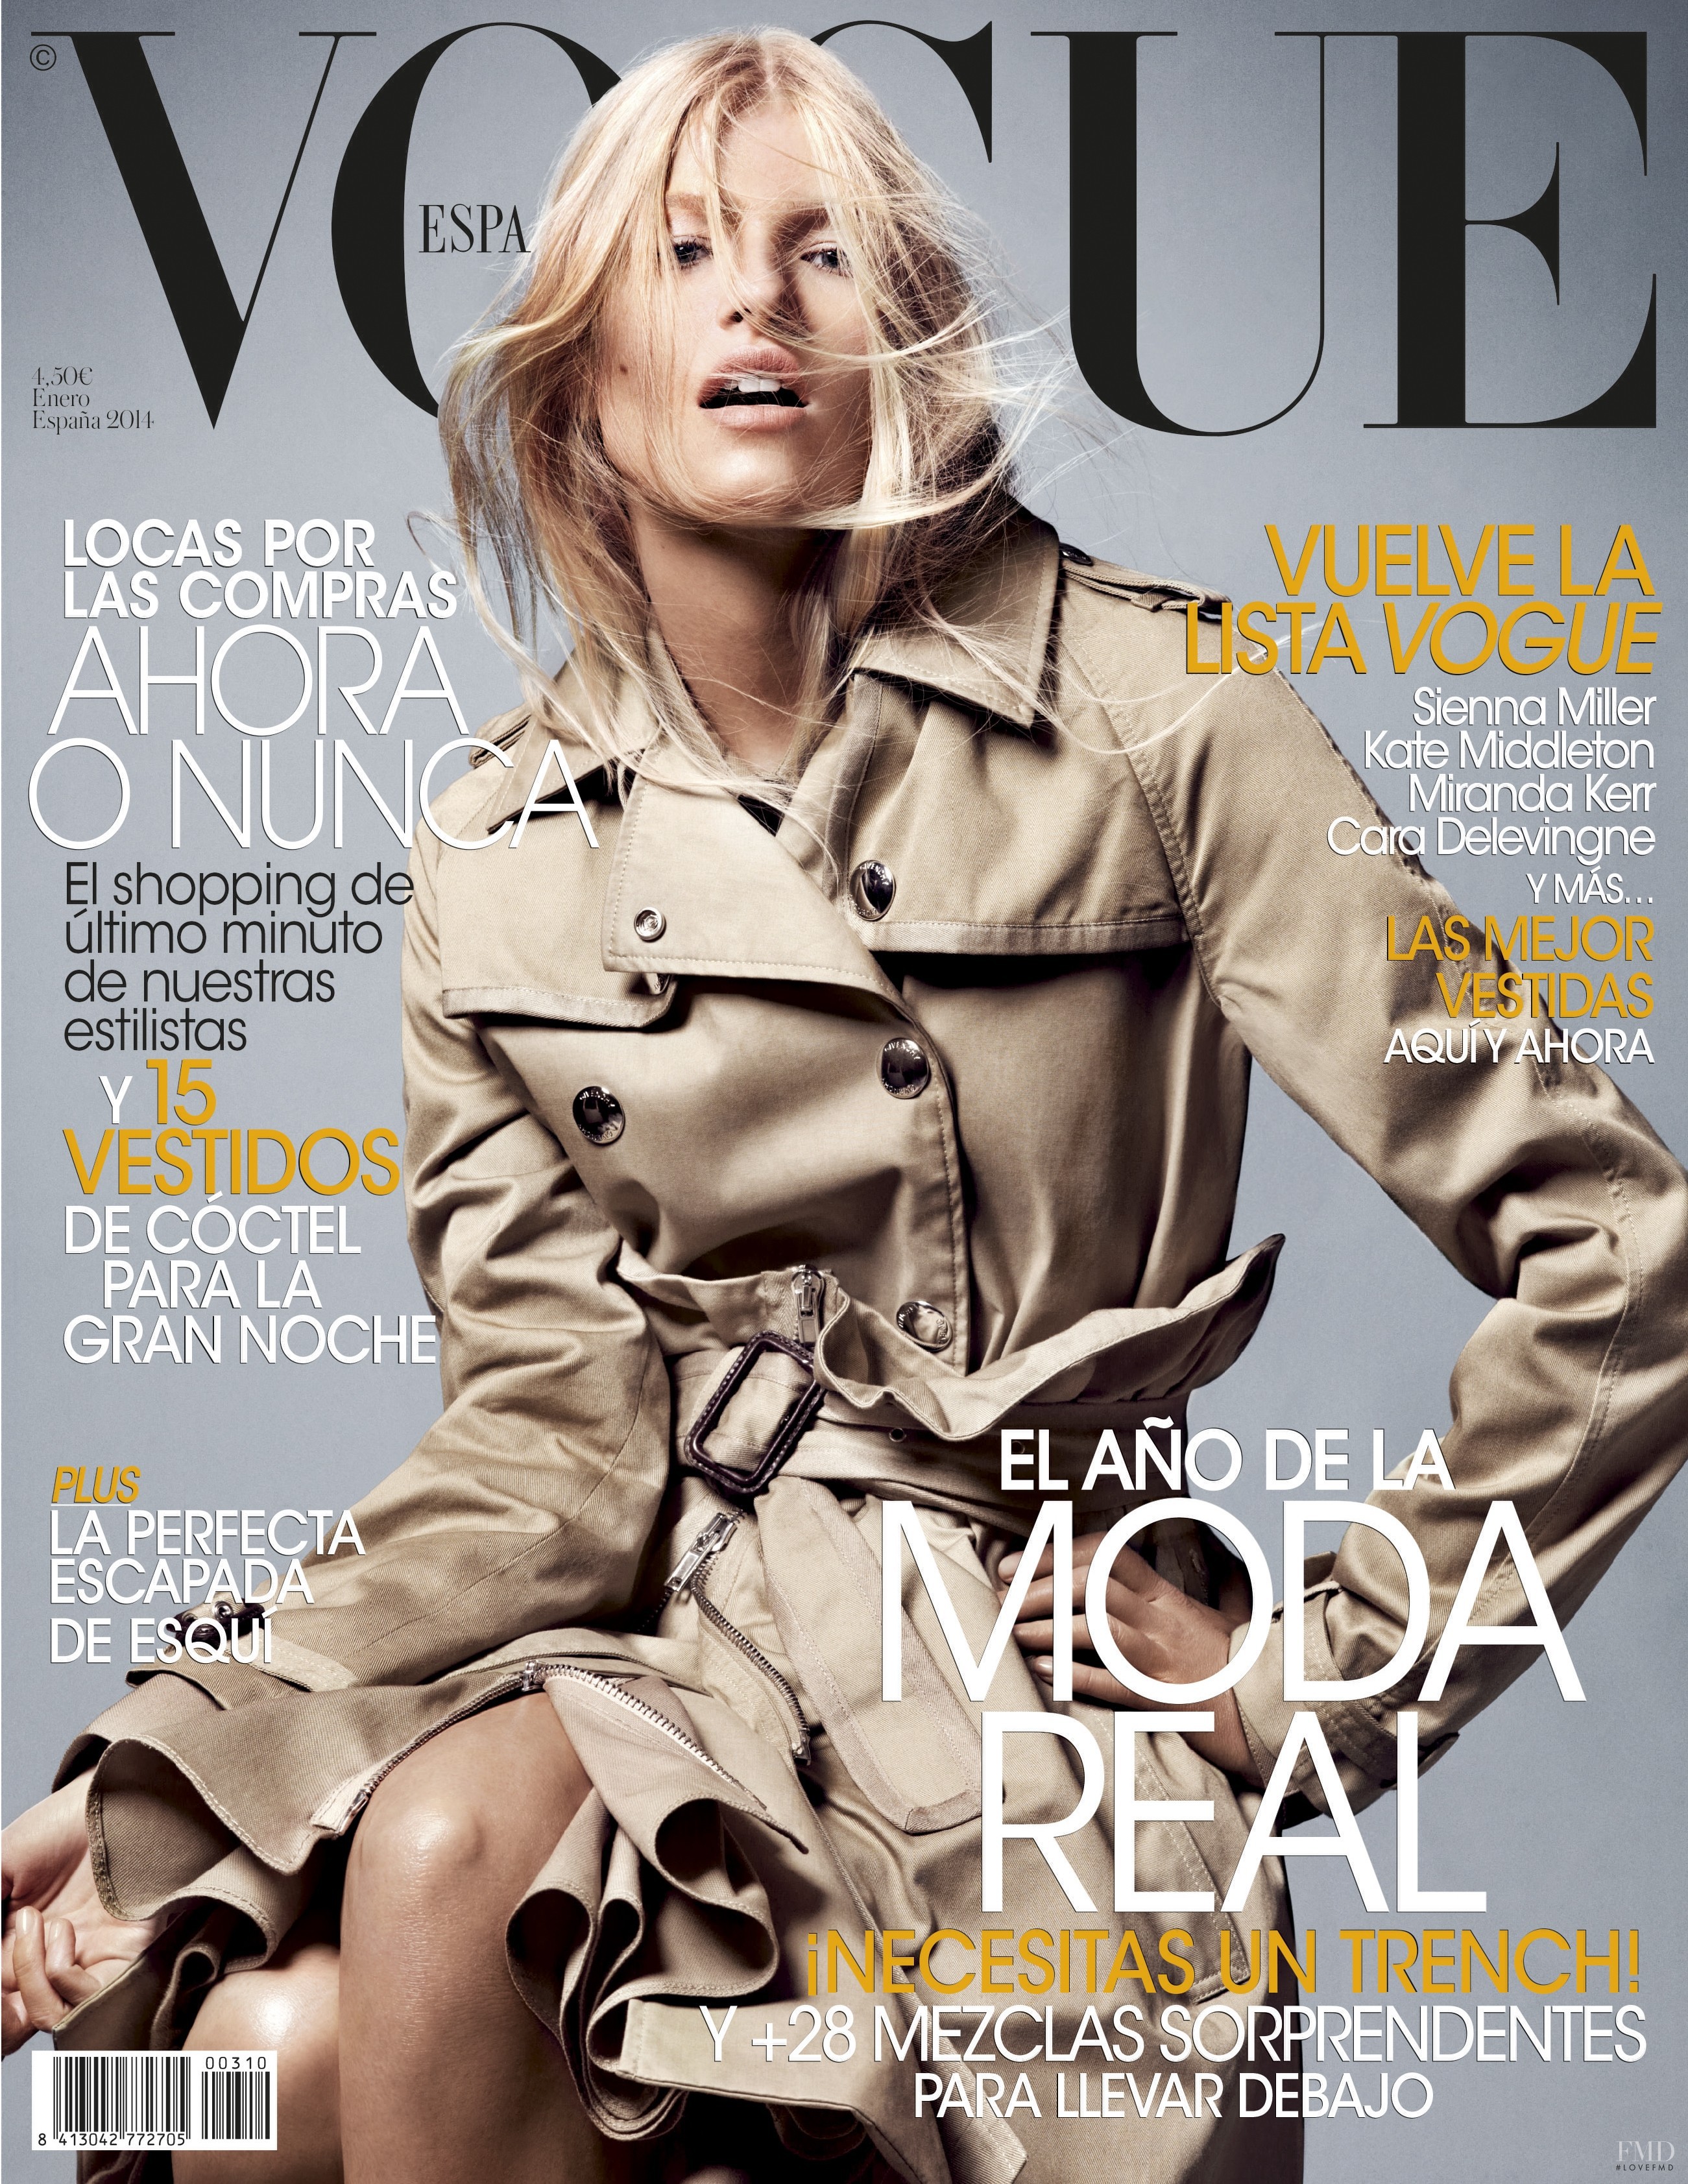 Cover of Vogue Spain with Louise Parker, January 2014 (ID:25846 ...